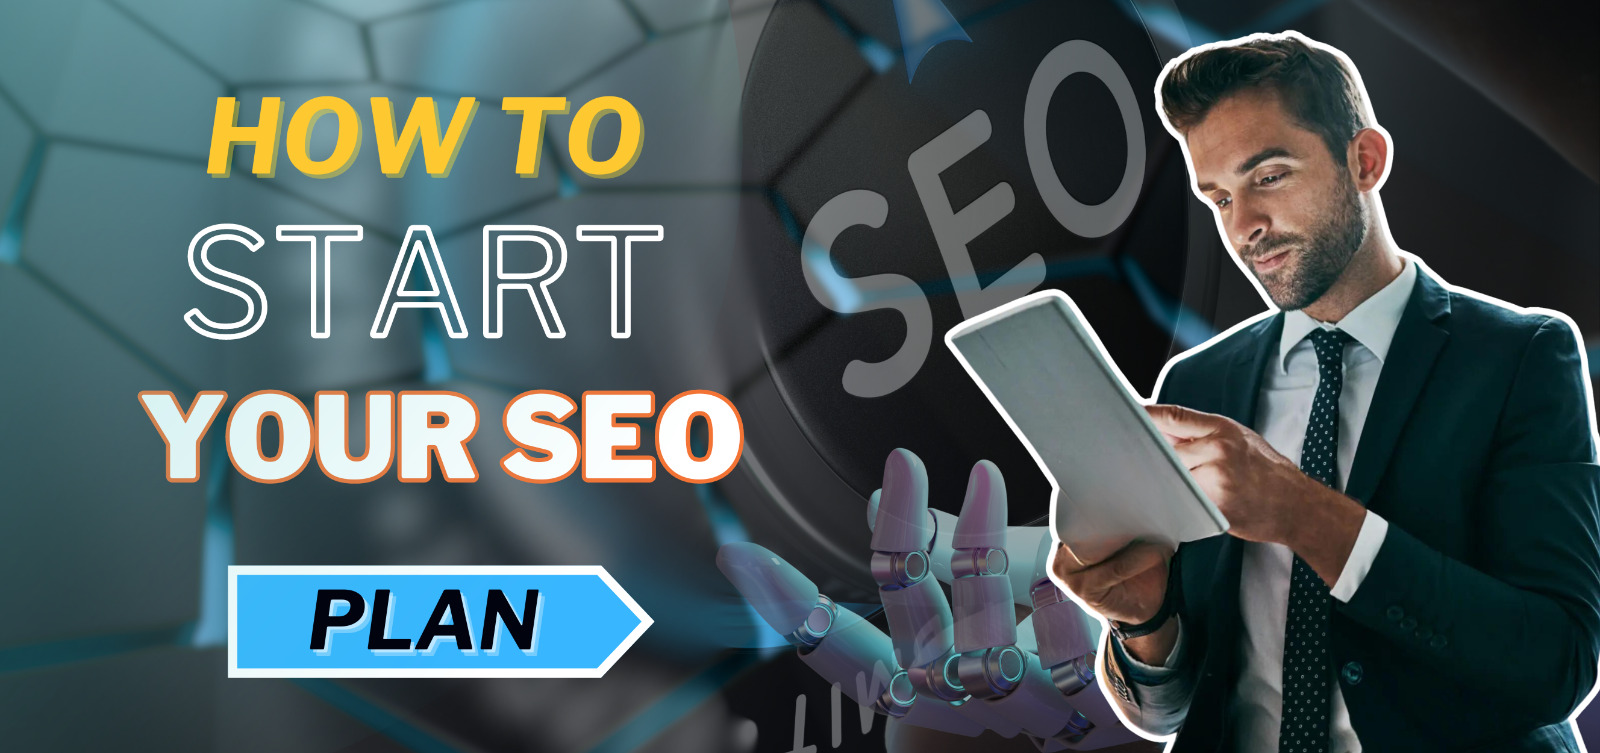 How to Start your SEO Plan?